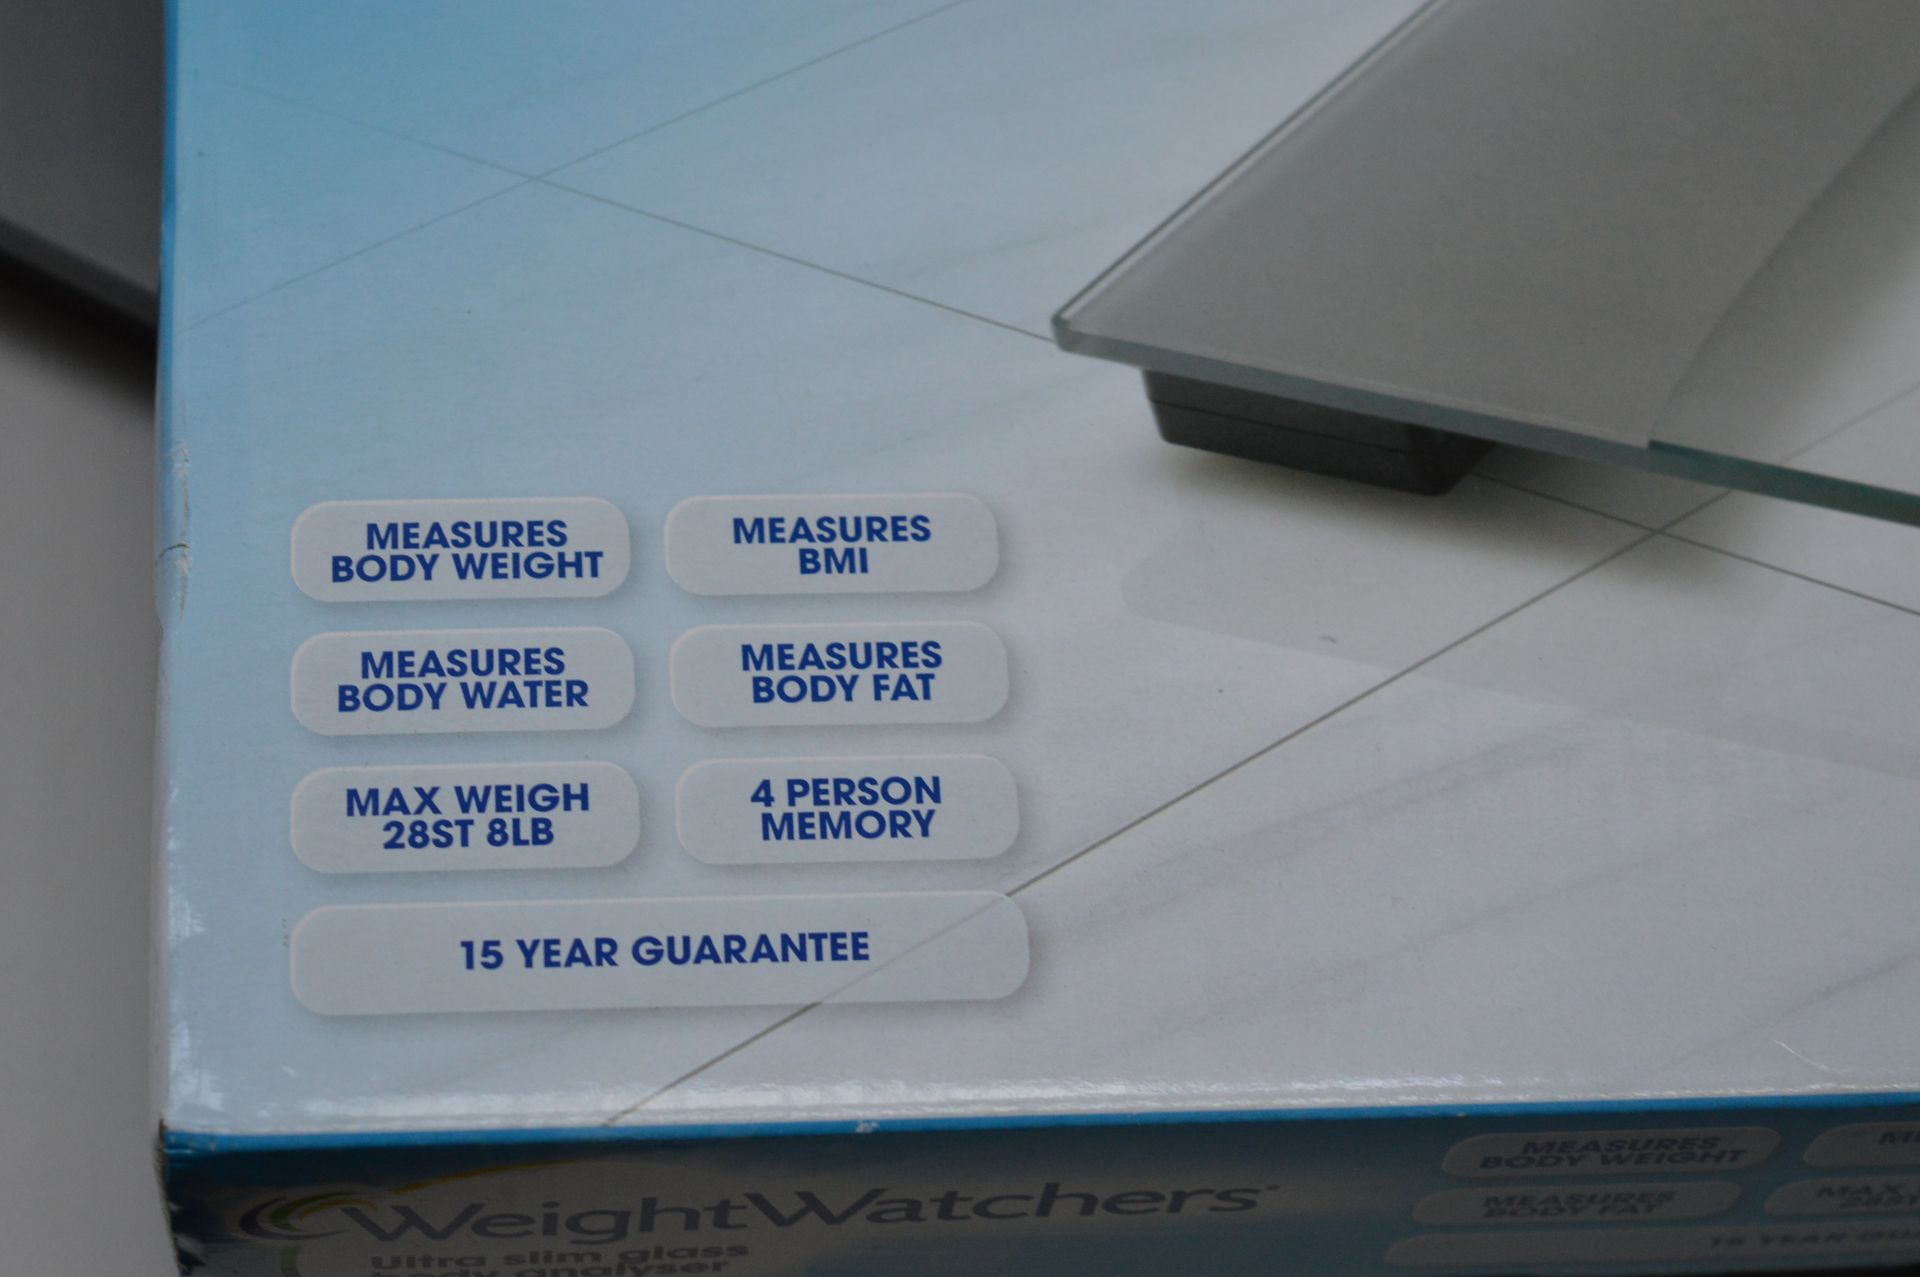 1 x Weight Watchers Ultra Slim Glass Body Analyser Scales - Measures Body Weight, Body Water, BMI - Image 3 of 6